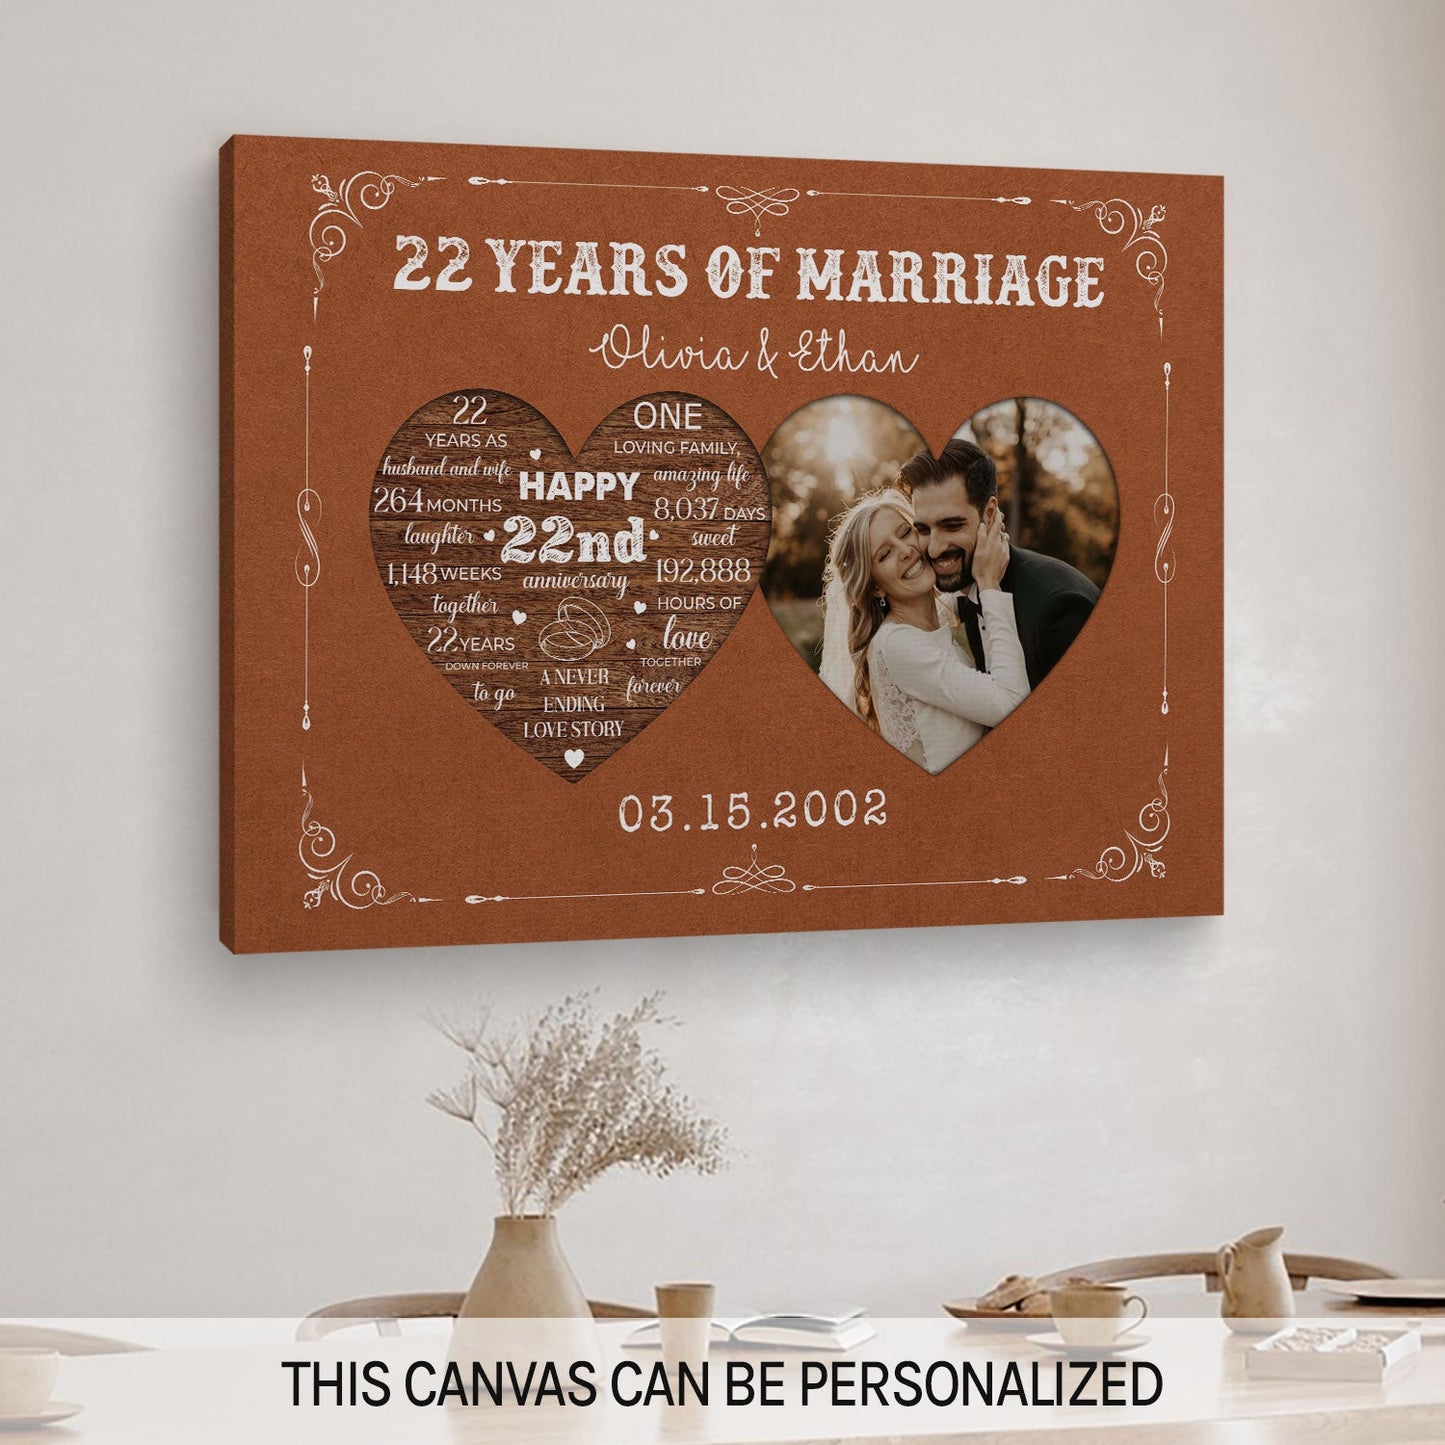 22 Years Of Marriage - Personalized 22 Year Anniversary gift For Husband or Wife - Custom Canvas Print - MyMindfulGifts